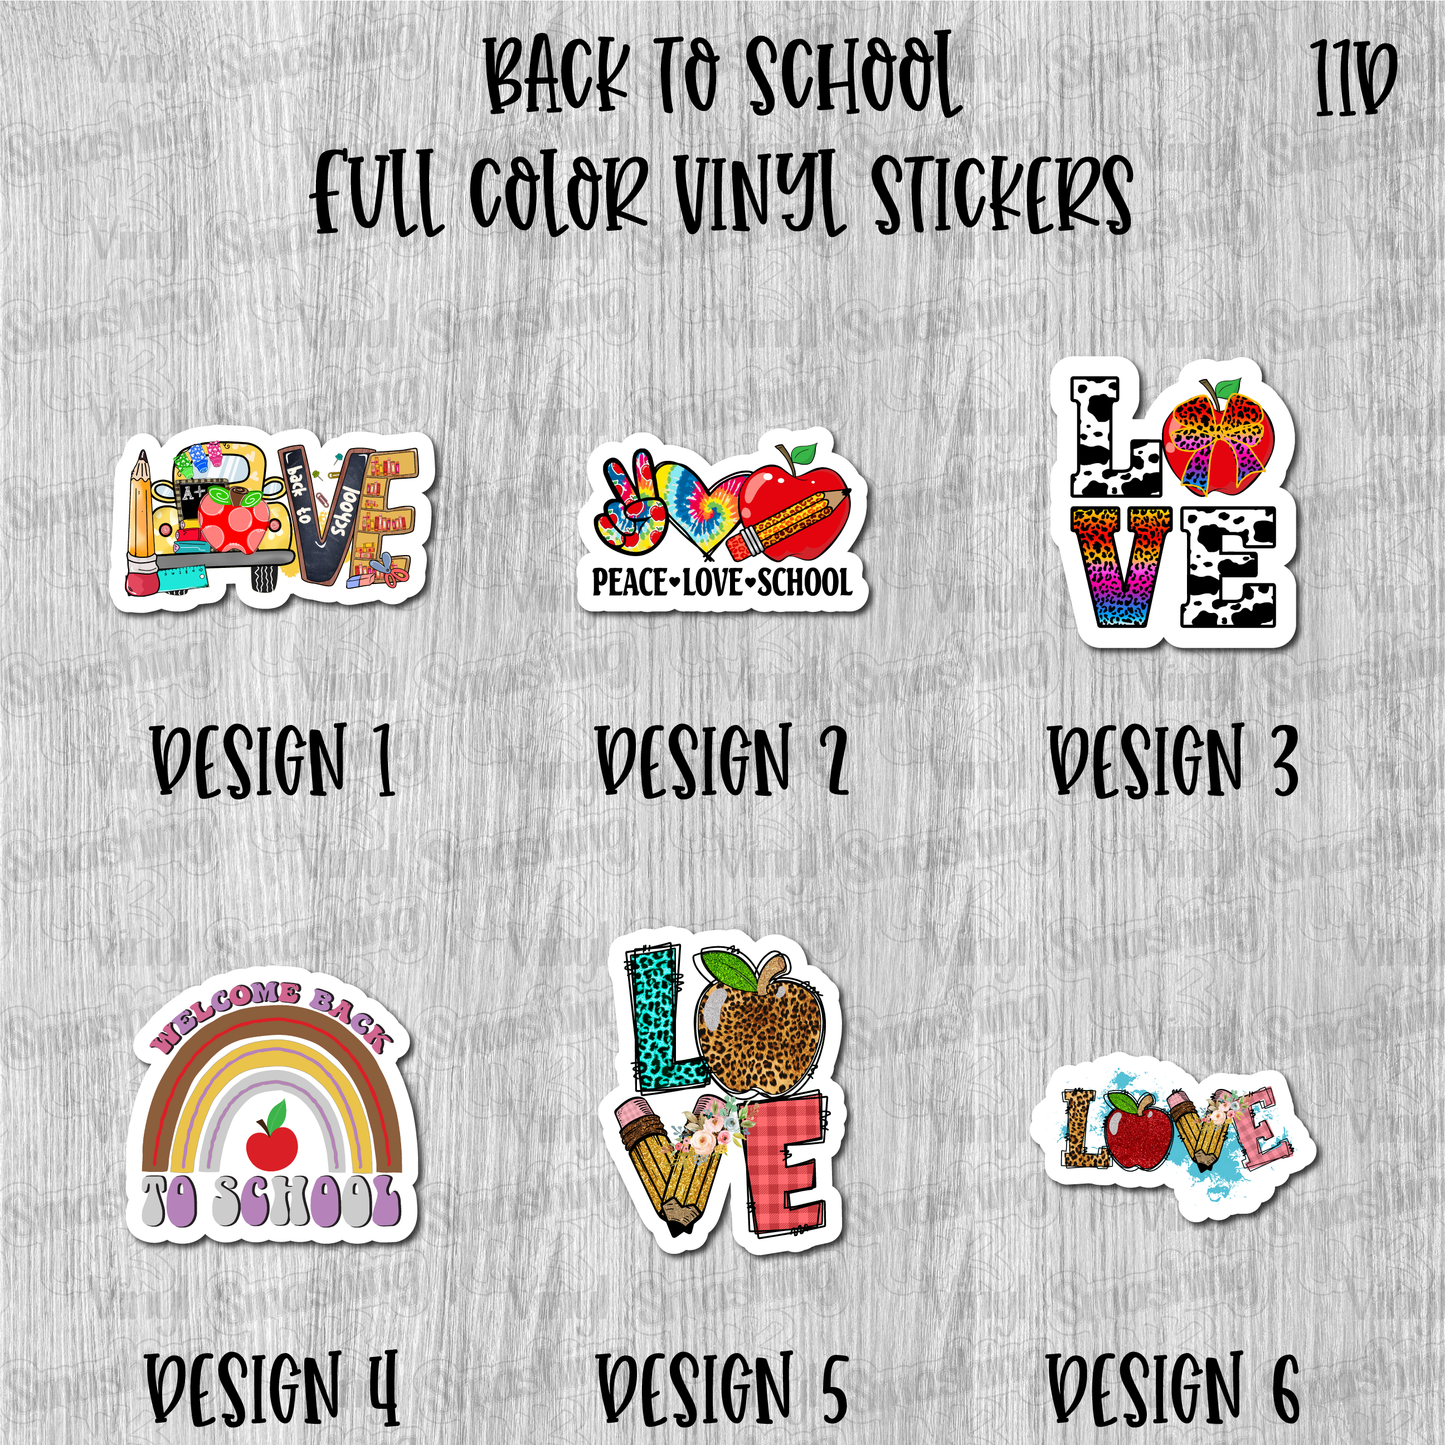 Back To School - Full Color Vinyl Stickers (SHIPS IN 3-7 BUS DAYS)